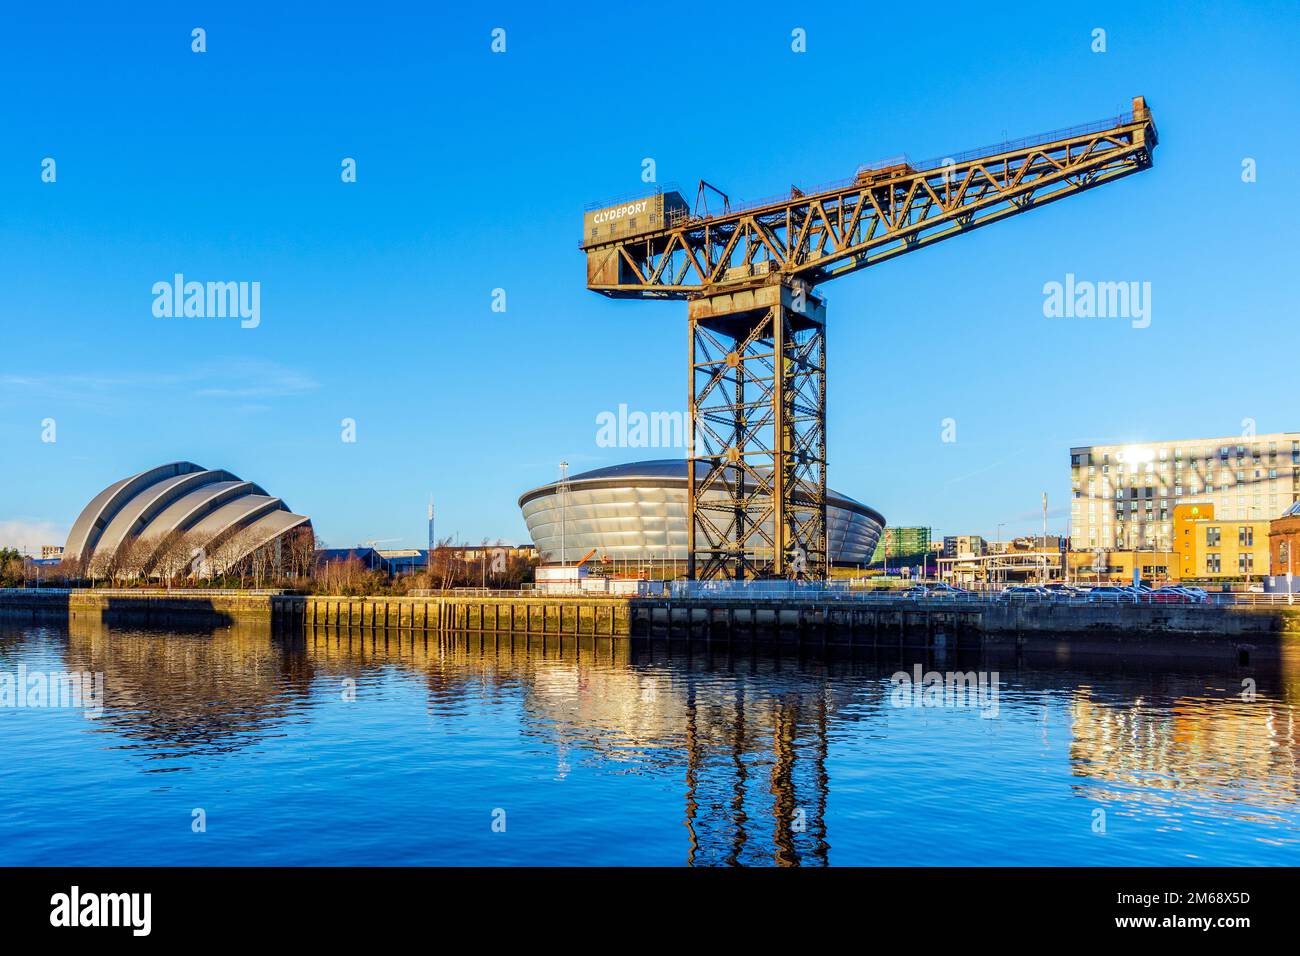 The Anderston Crane standing at the edge of the River Clyde with the Armadillo and SECC entertainment venues in the background, Glasgow, Scotland, UK Stock Photo